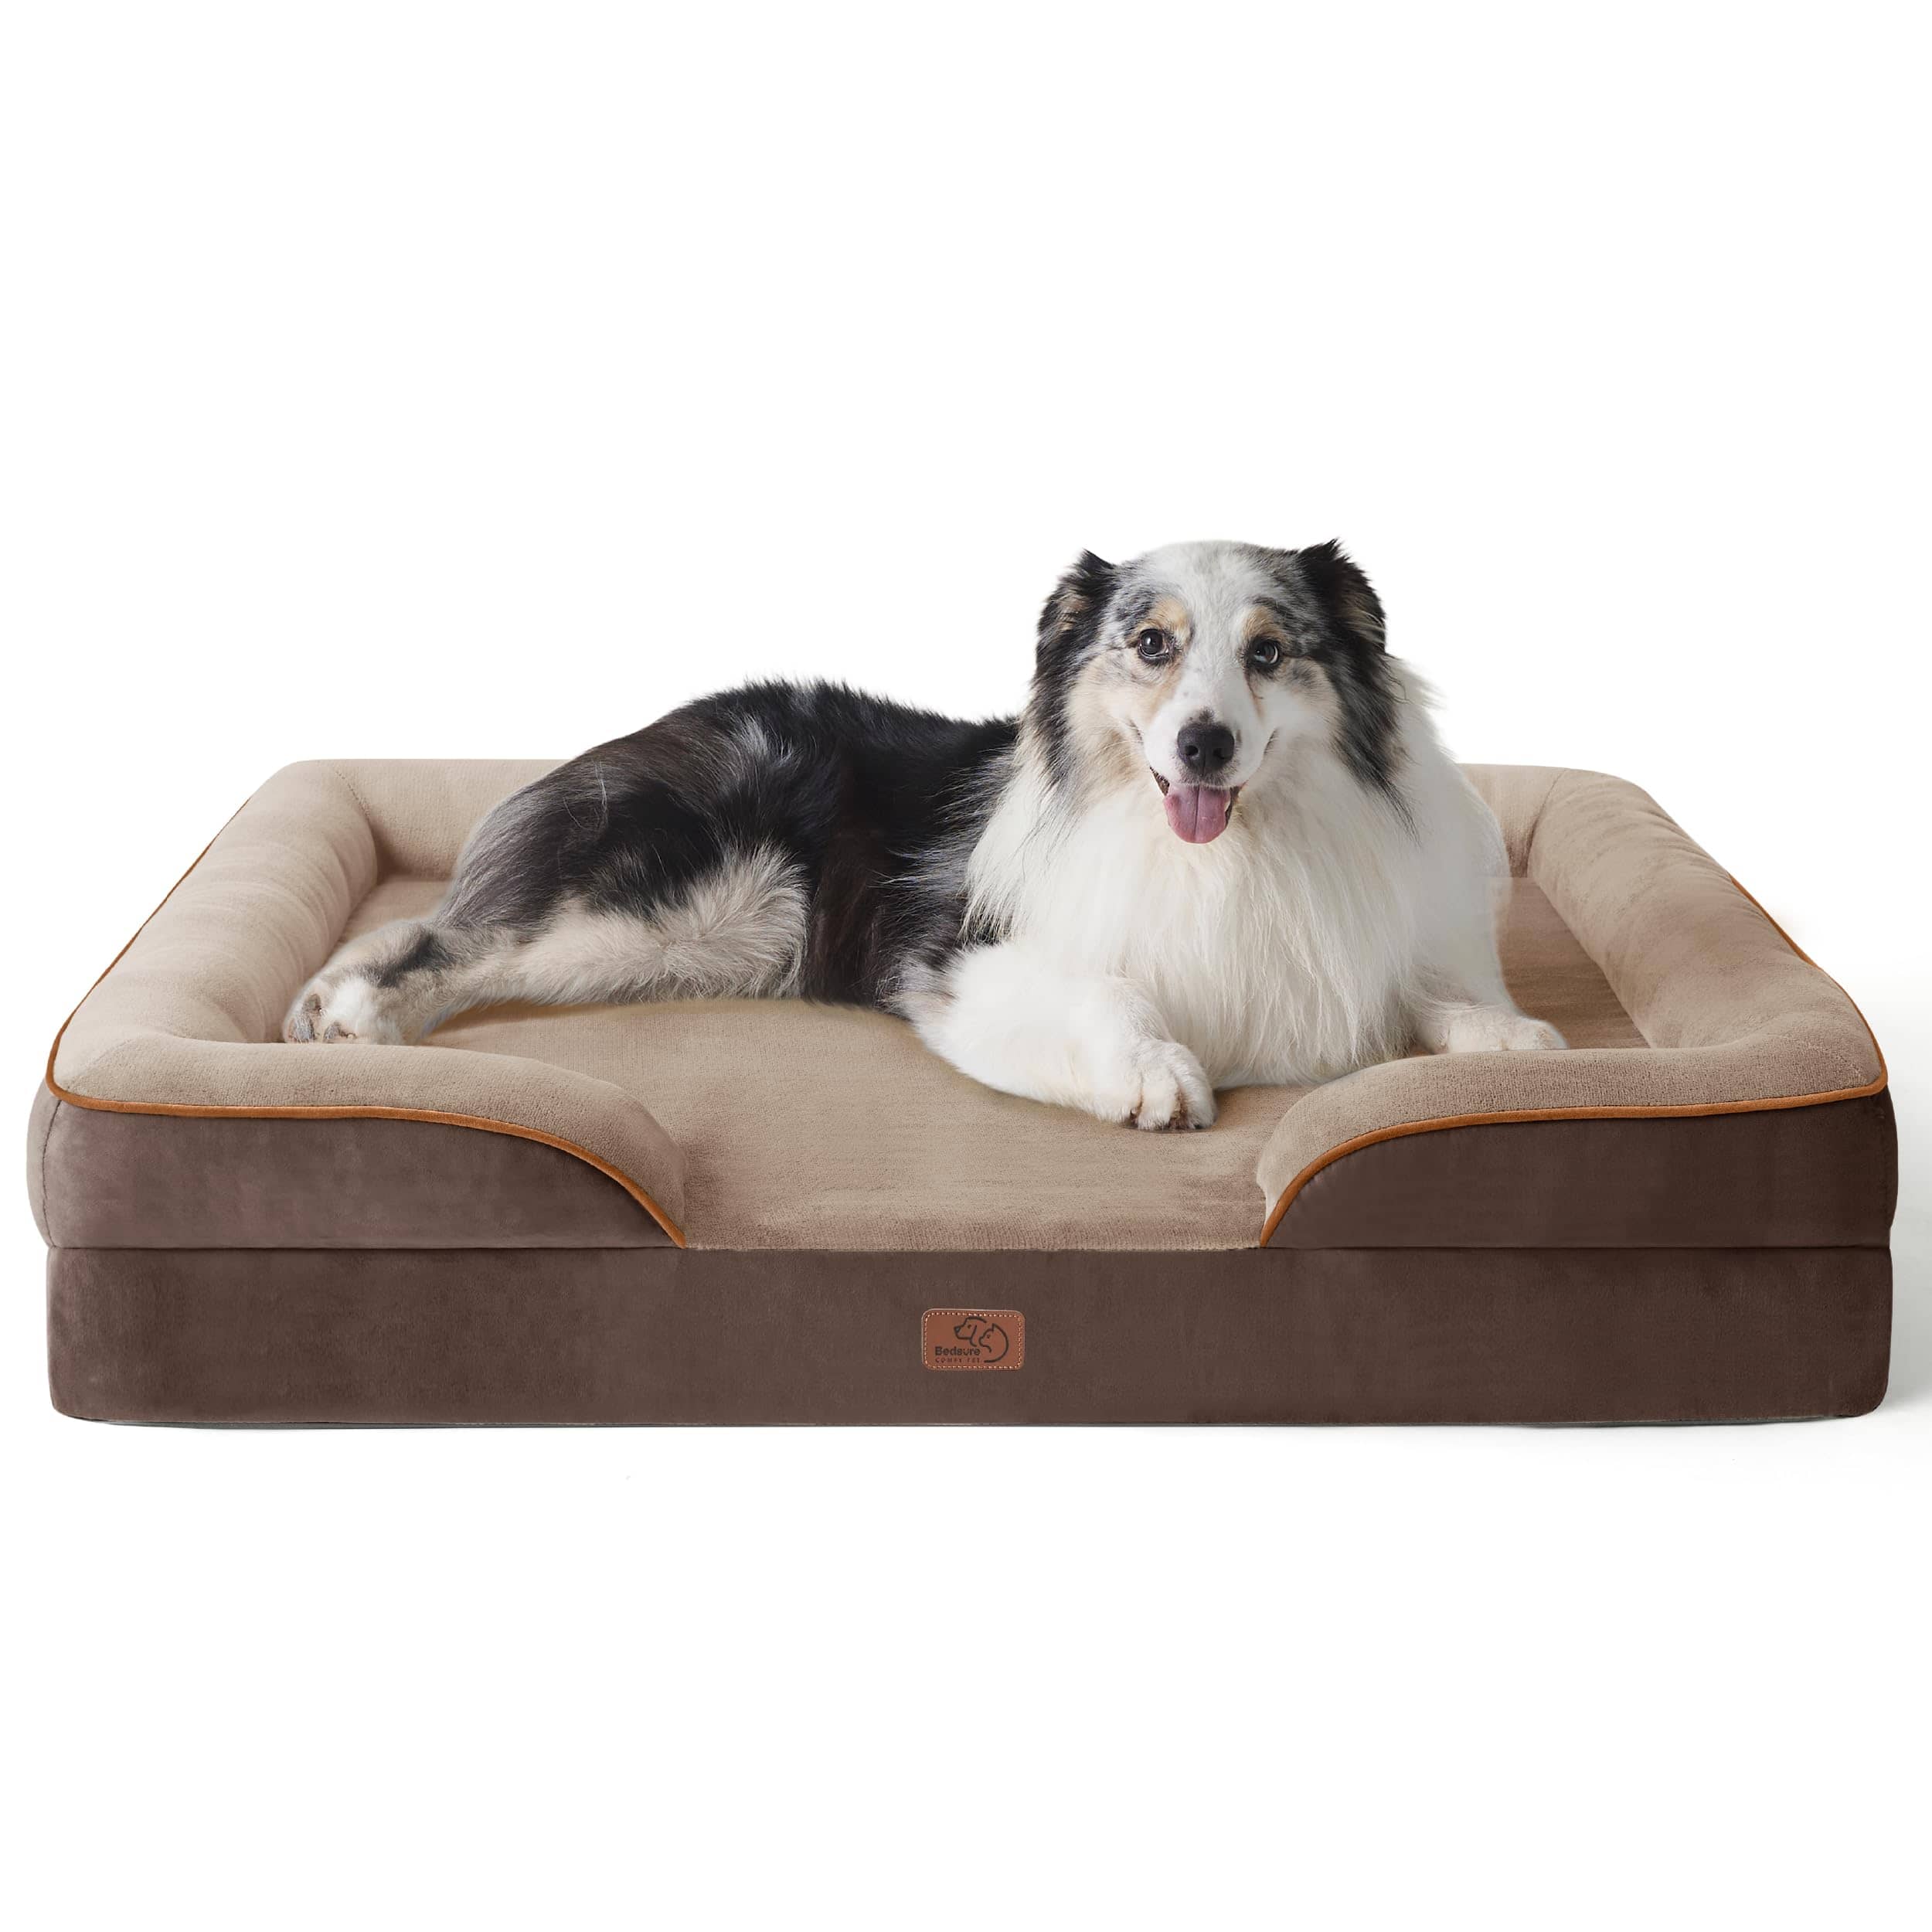 TIHEARY Orthopedic Dog Beds with Removable Washable Cover